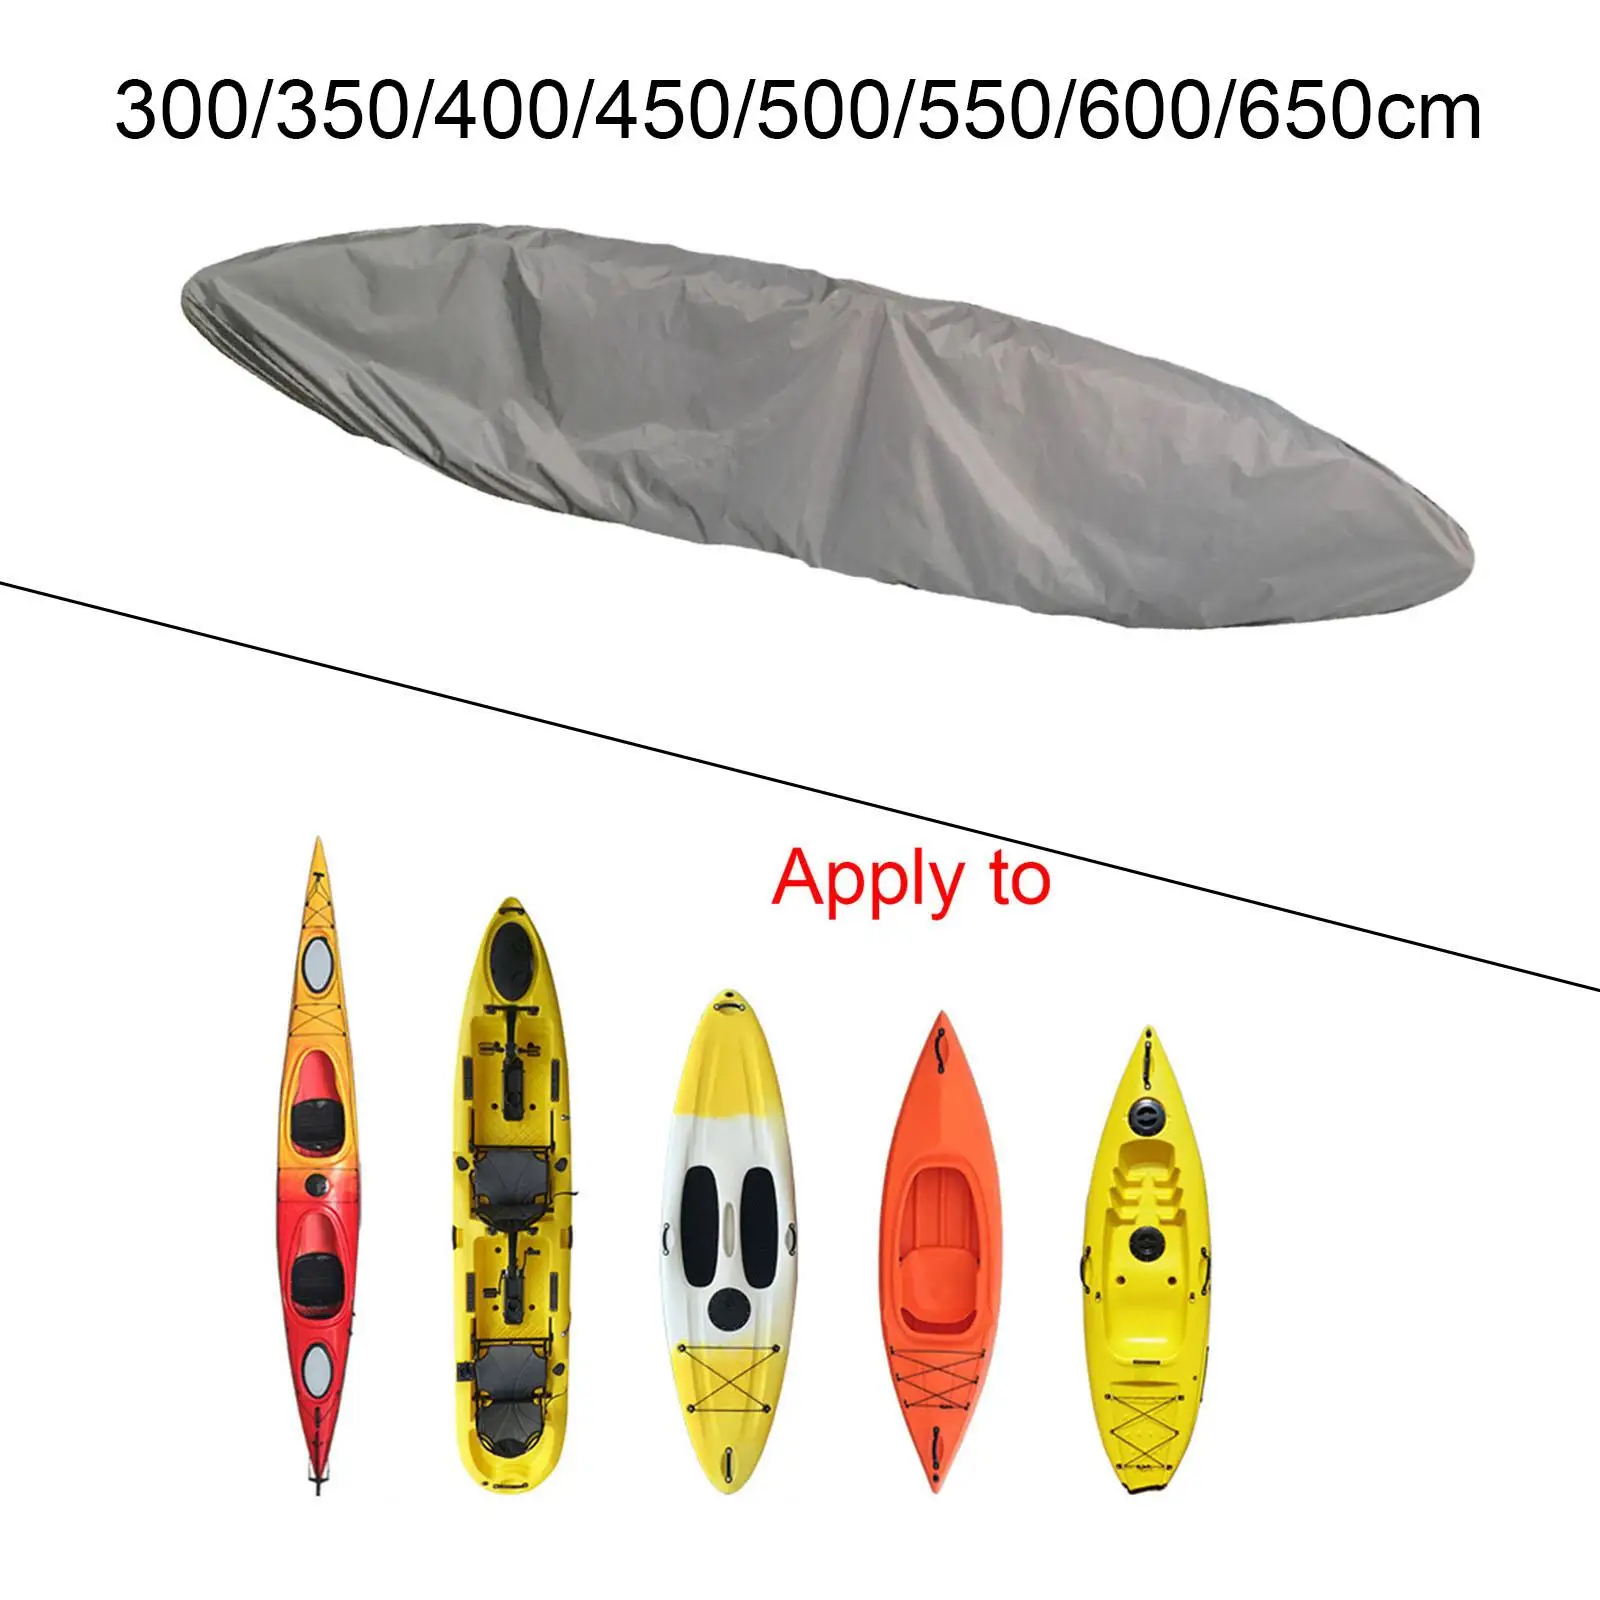 Kayak Cover Waterproof Canoe Cover Protector Oxford Cloth Boat Storage Cover